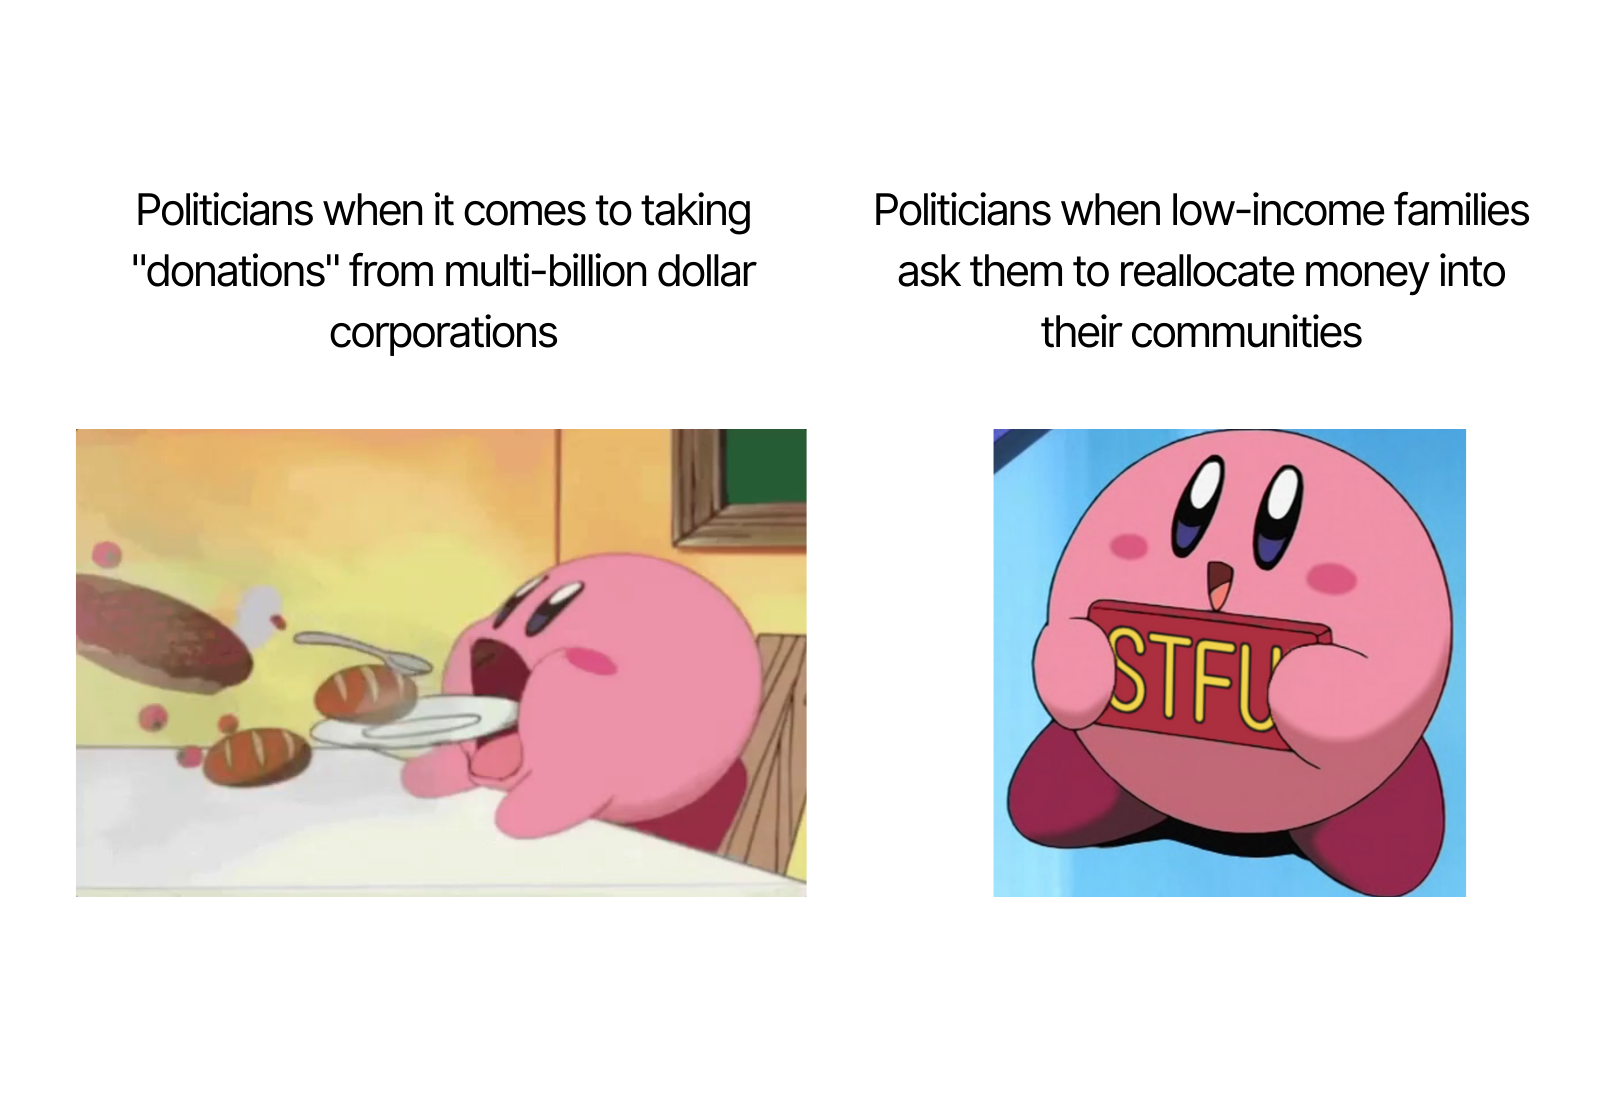 Image of Kirby. The first image is of him eating food with the caption that says "politicians when it comes to taking "donations" from multi-billion dollar corporations"